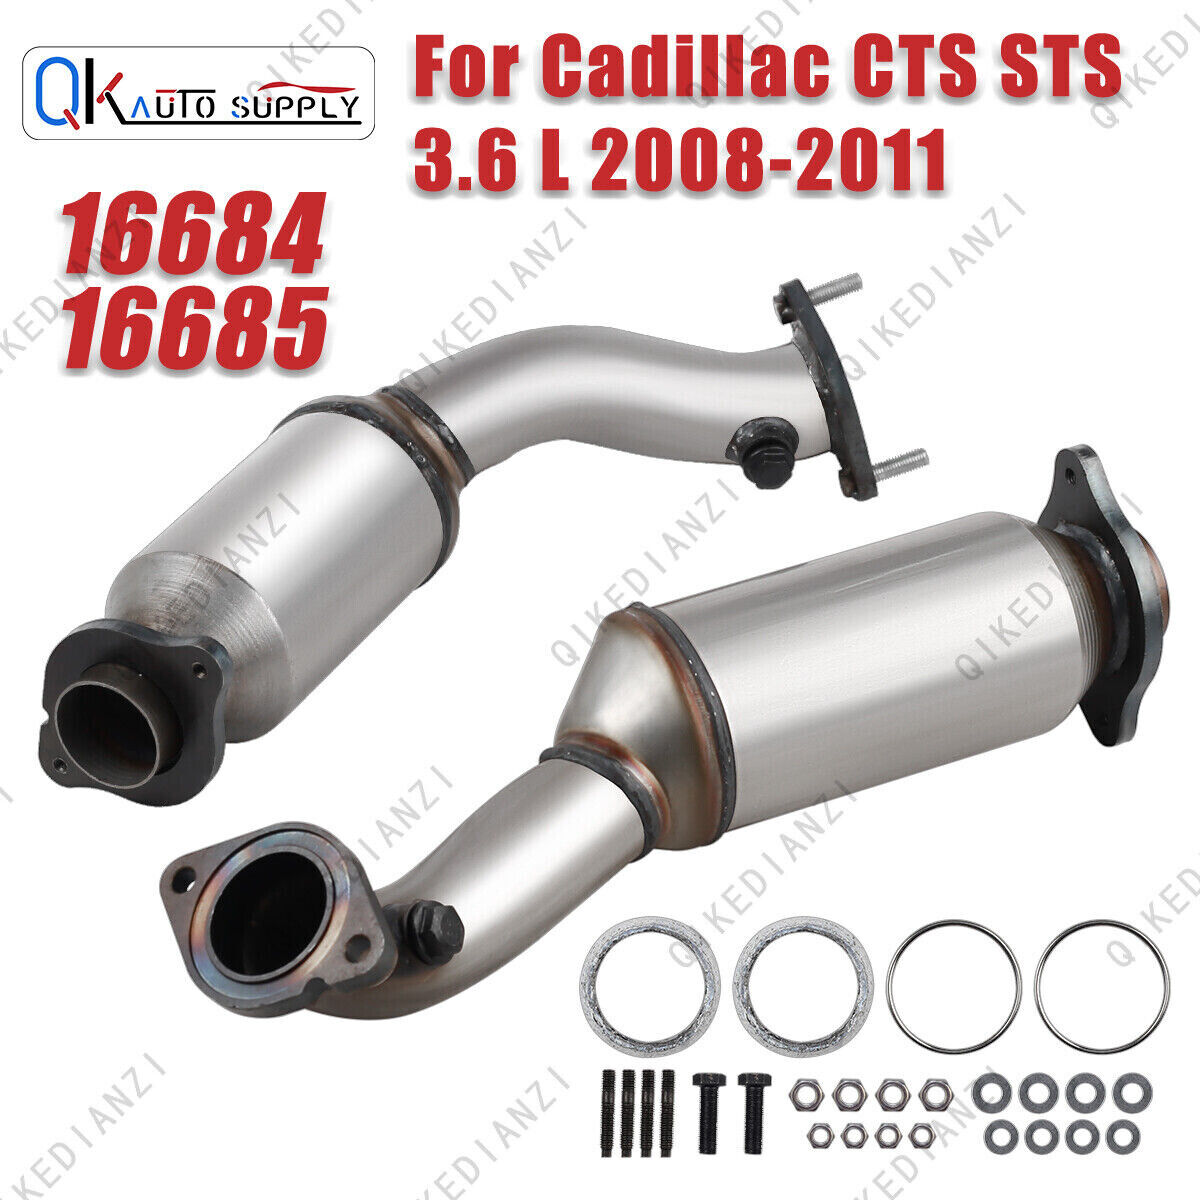 Exhaust Catalytic Converter For Cadillac CTS&STS 3.6L V6 2008-2011 Left & Right